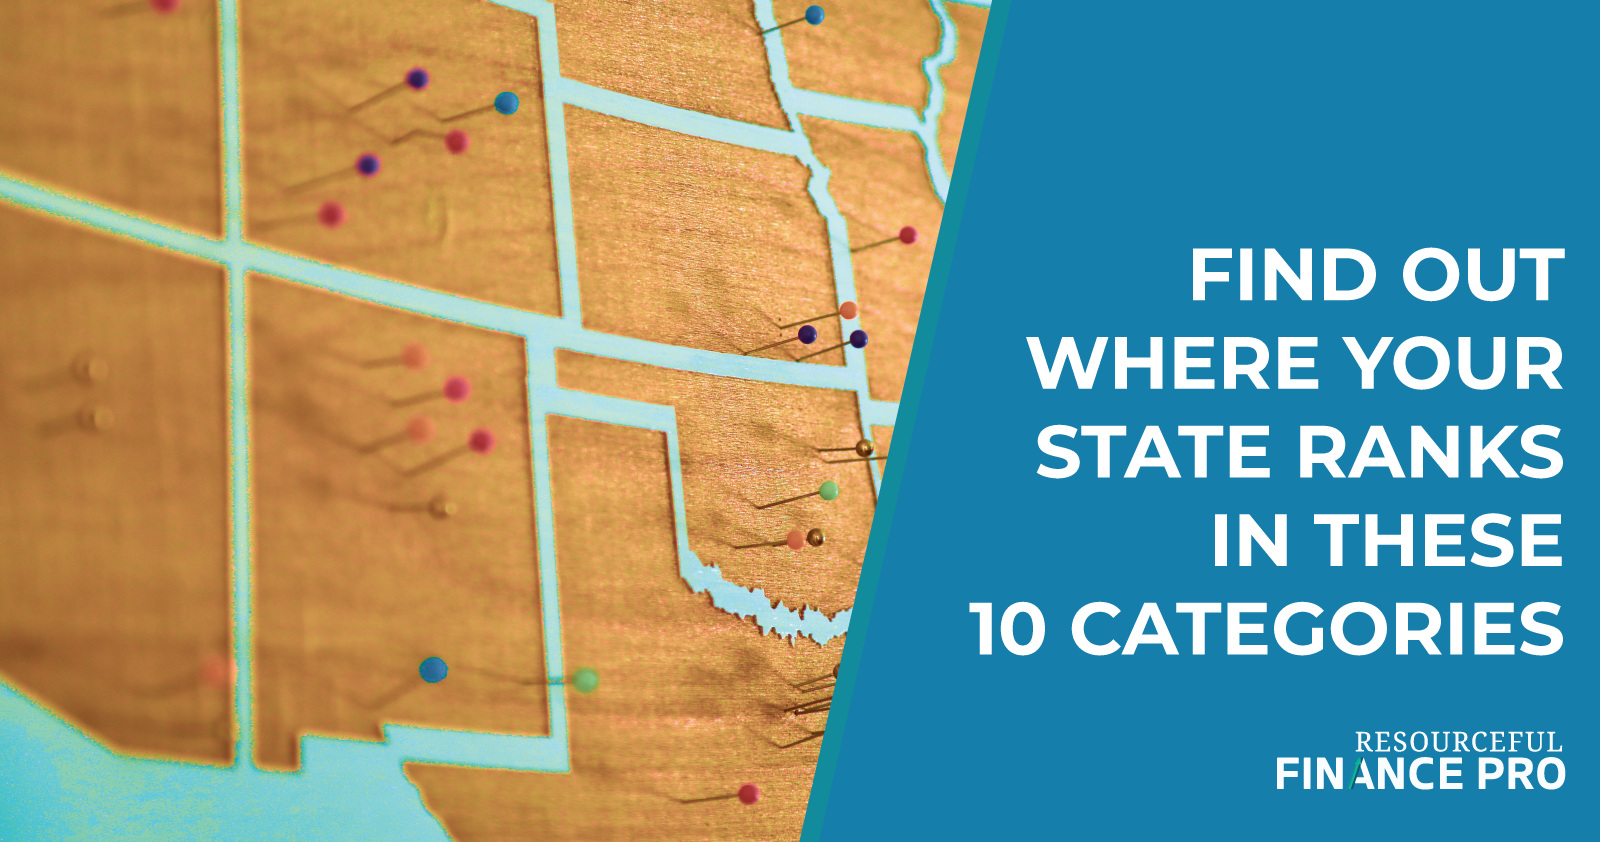 Find out where your state ranks in these 10 categories